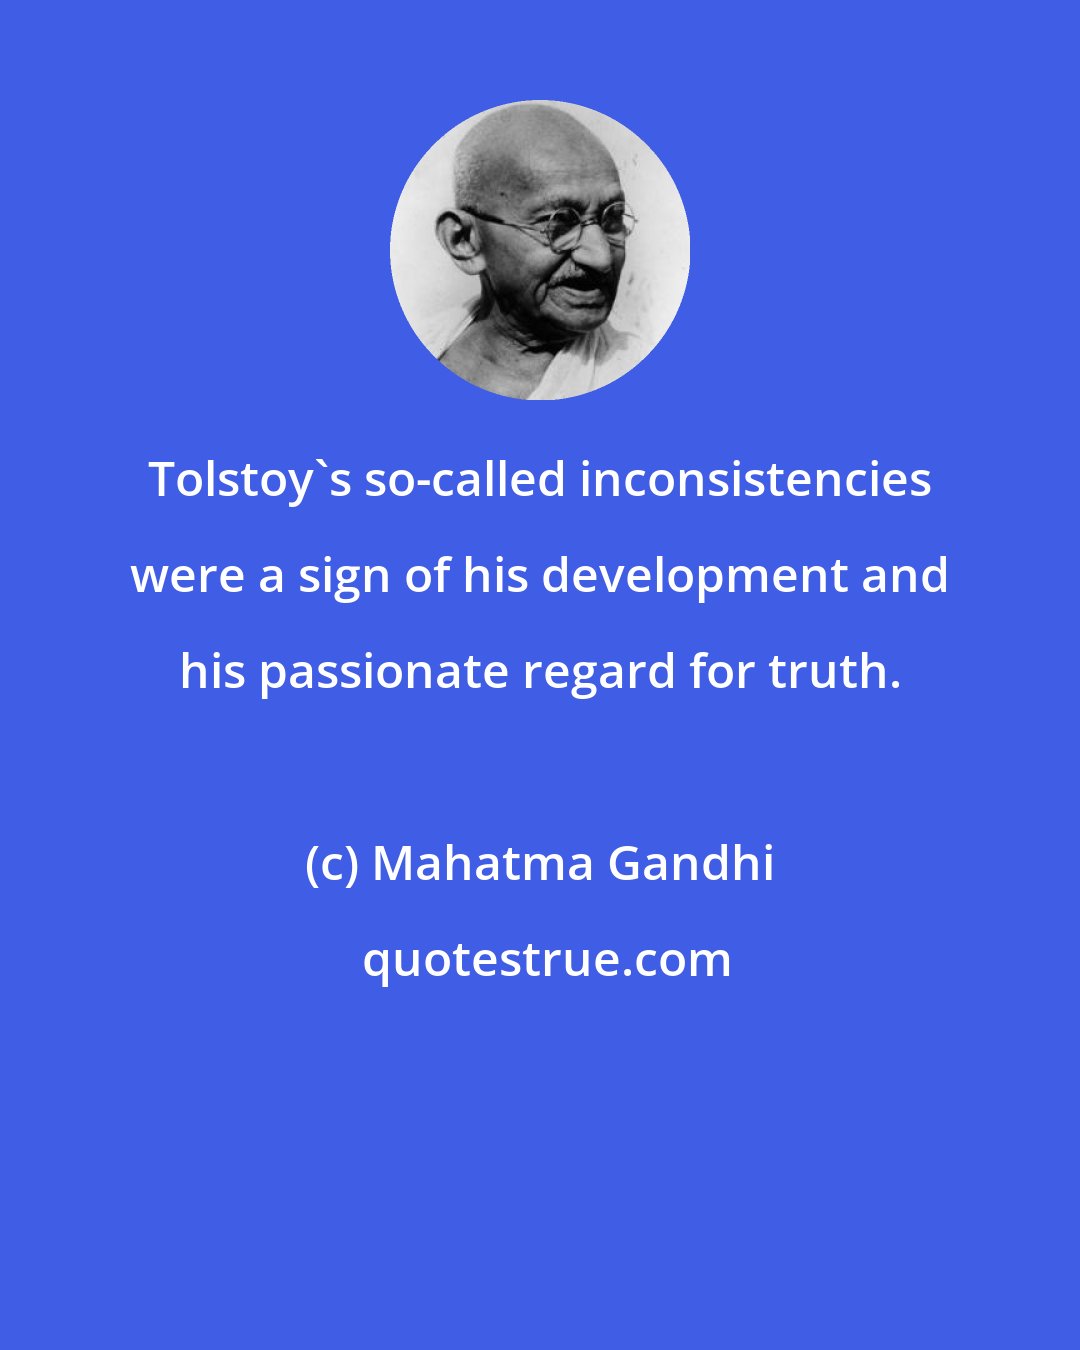 Mahatma Gandhi: Tolstoy's so-called inconsistencies were a sign of his development and his passionate regard for truth.